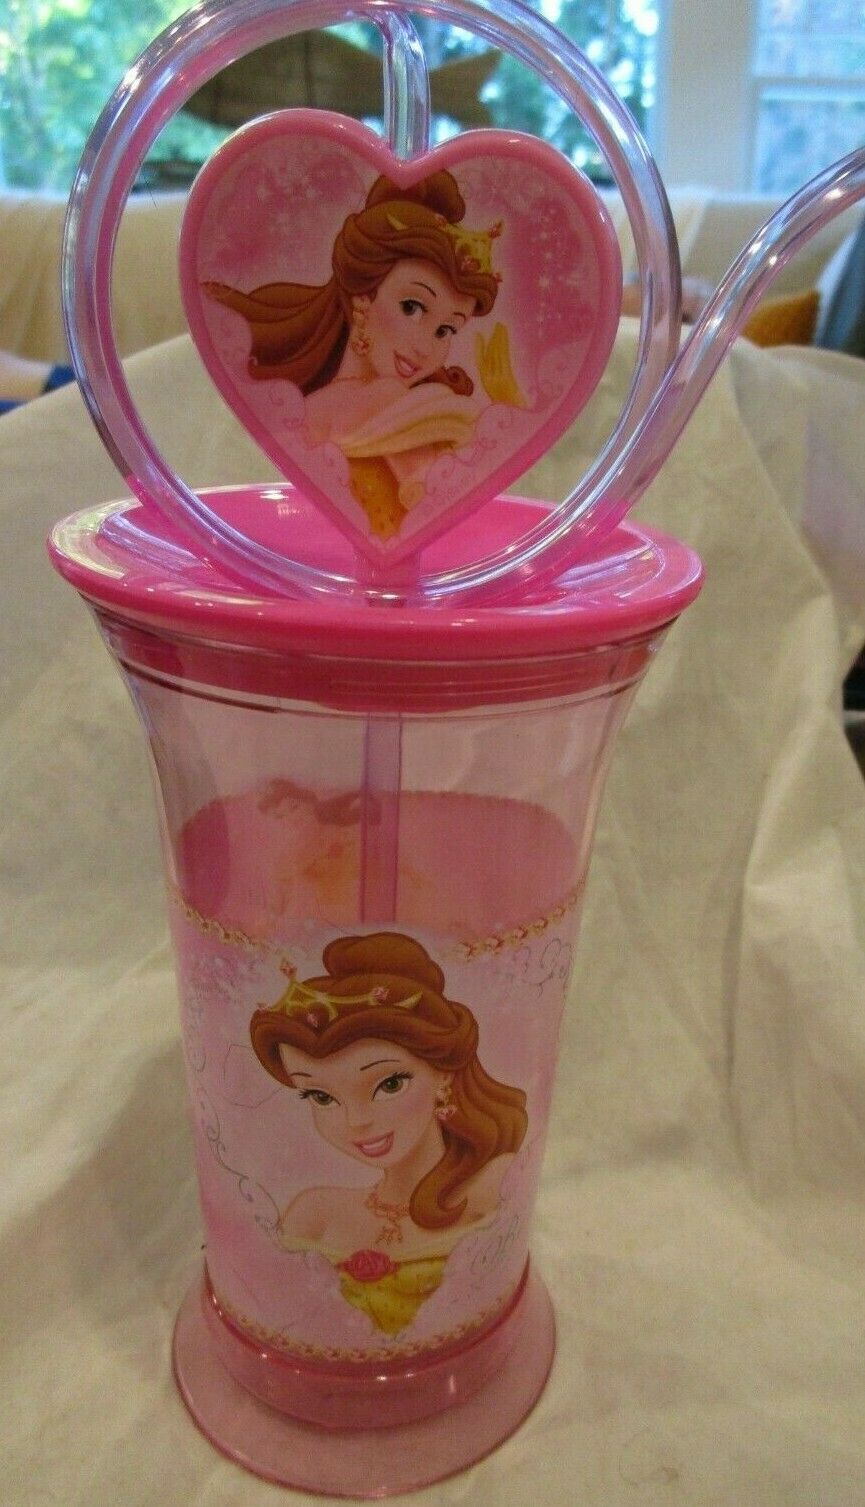 Primary image for WDW DISNEY Princess Belle Tumbler with Straw and Spinning Heart Brand New